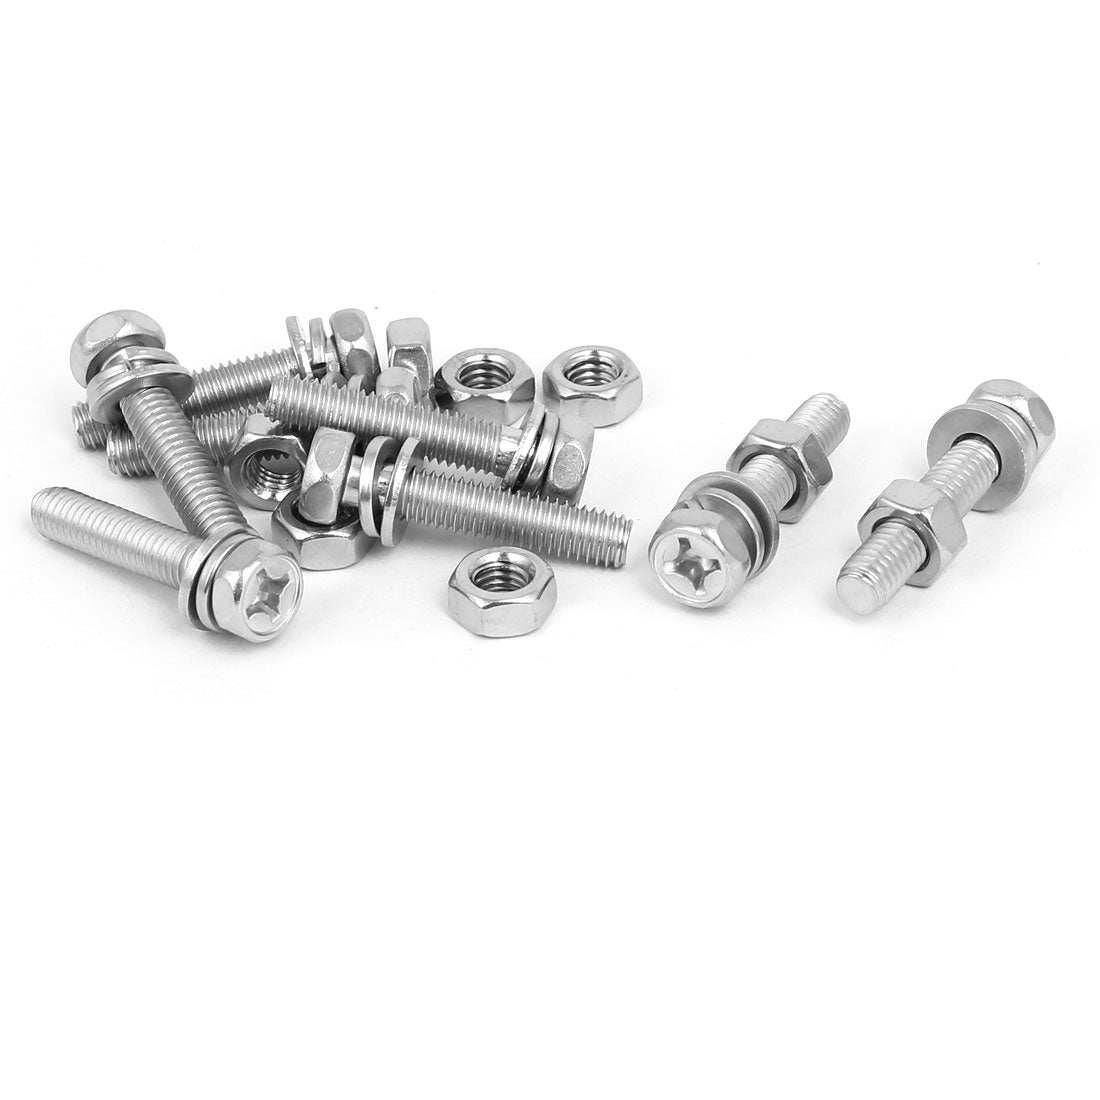 uxcell Uxcell M6 x 30mm 304 Stainless Steel Phillips Hex Head Bolts Nuts w Washers 8 Sets